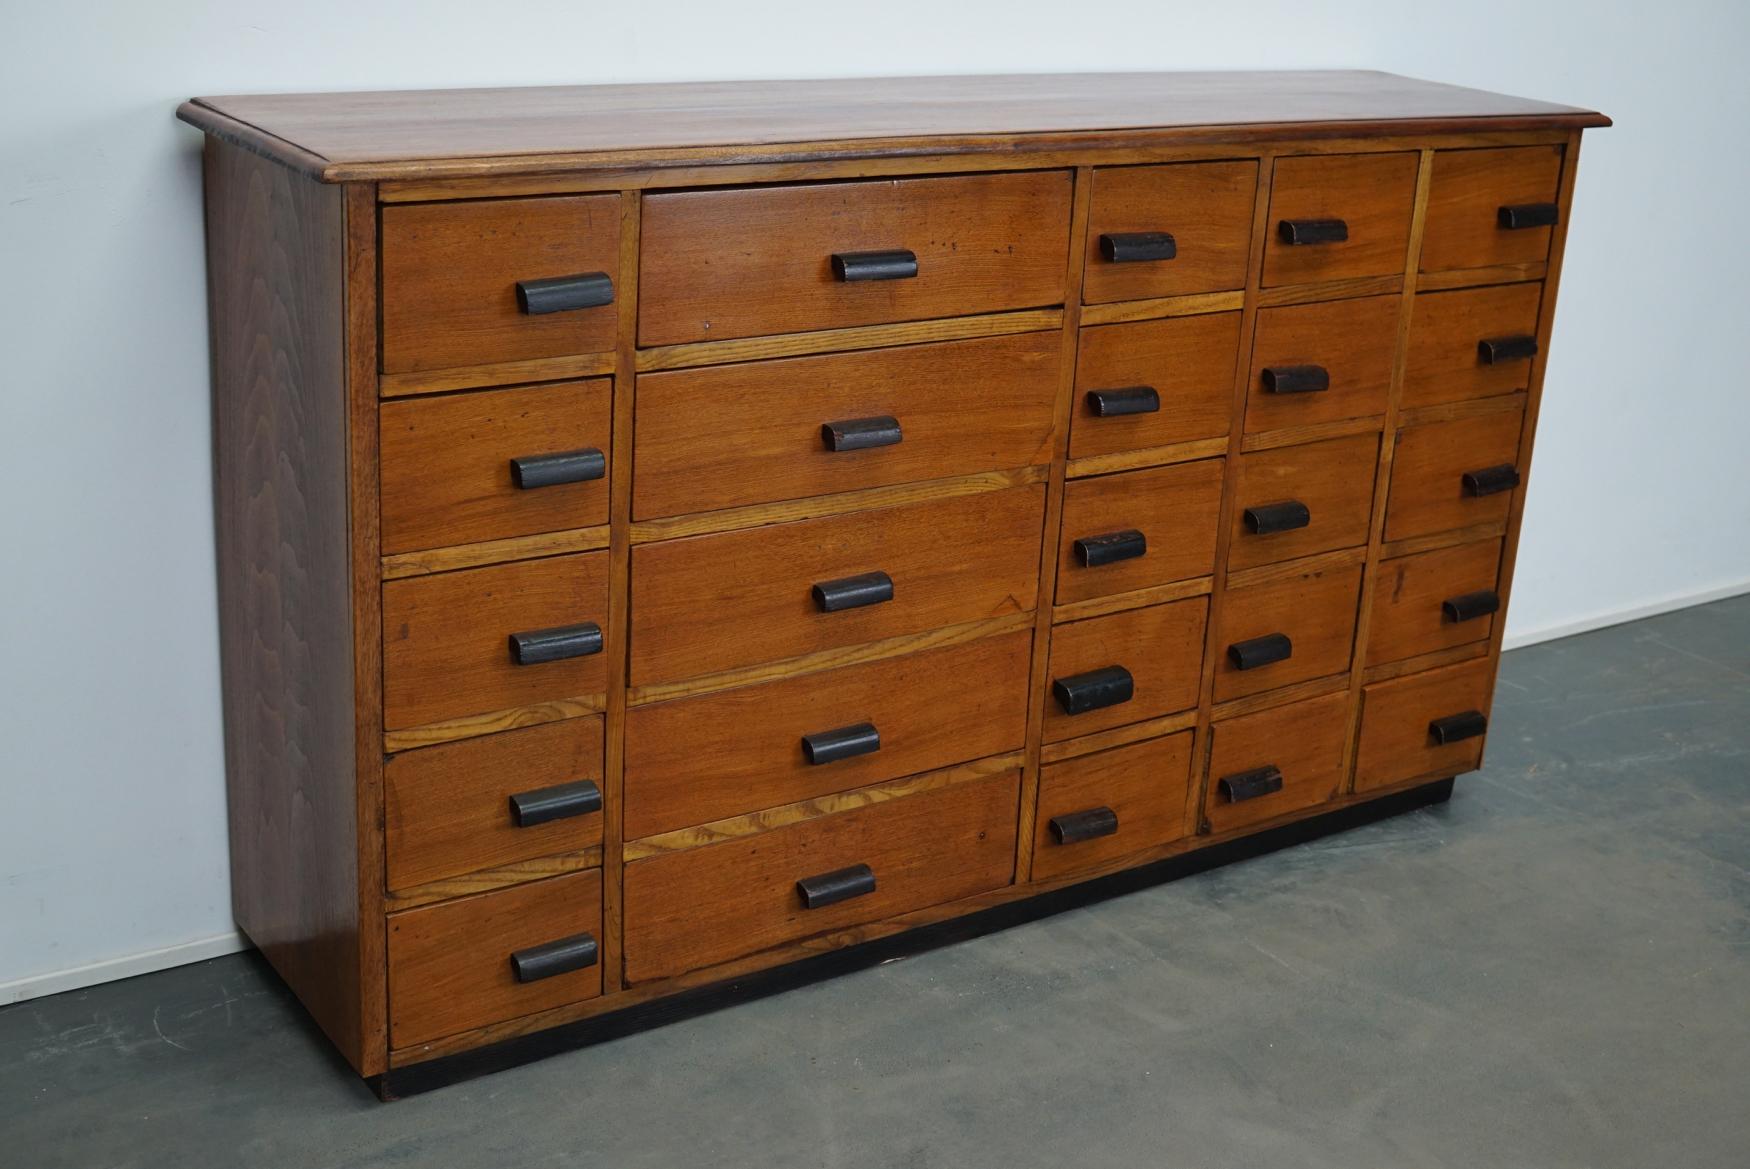 This apothecary cabinet was made in Germany, circa 1940s. It features 25 drawers in two sizes with nice black wooden handles. It is made oak and pine and it retained a nice patina from years of use. The interior dimensions of the drawers are: Large